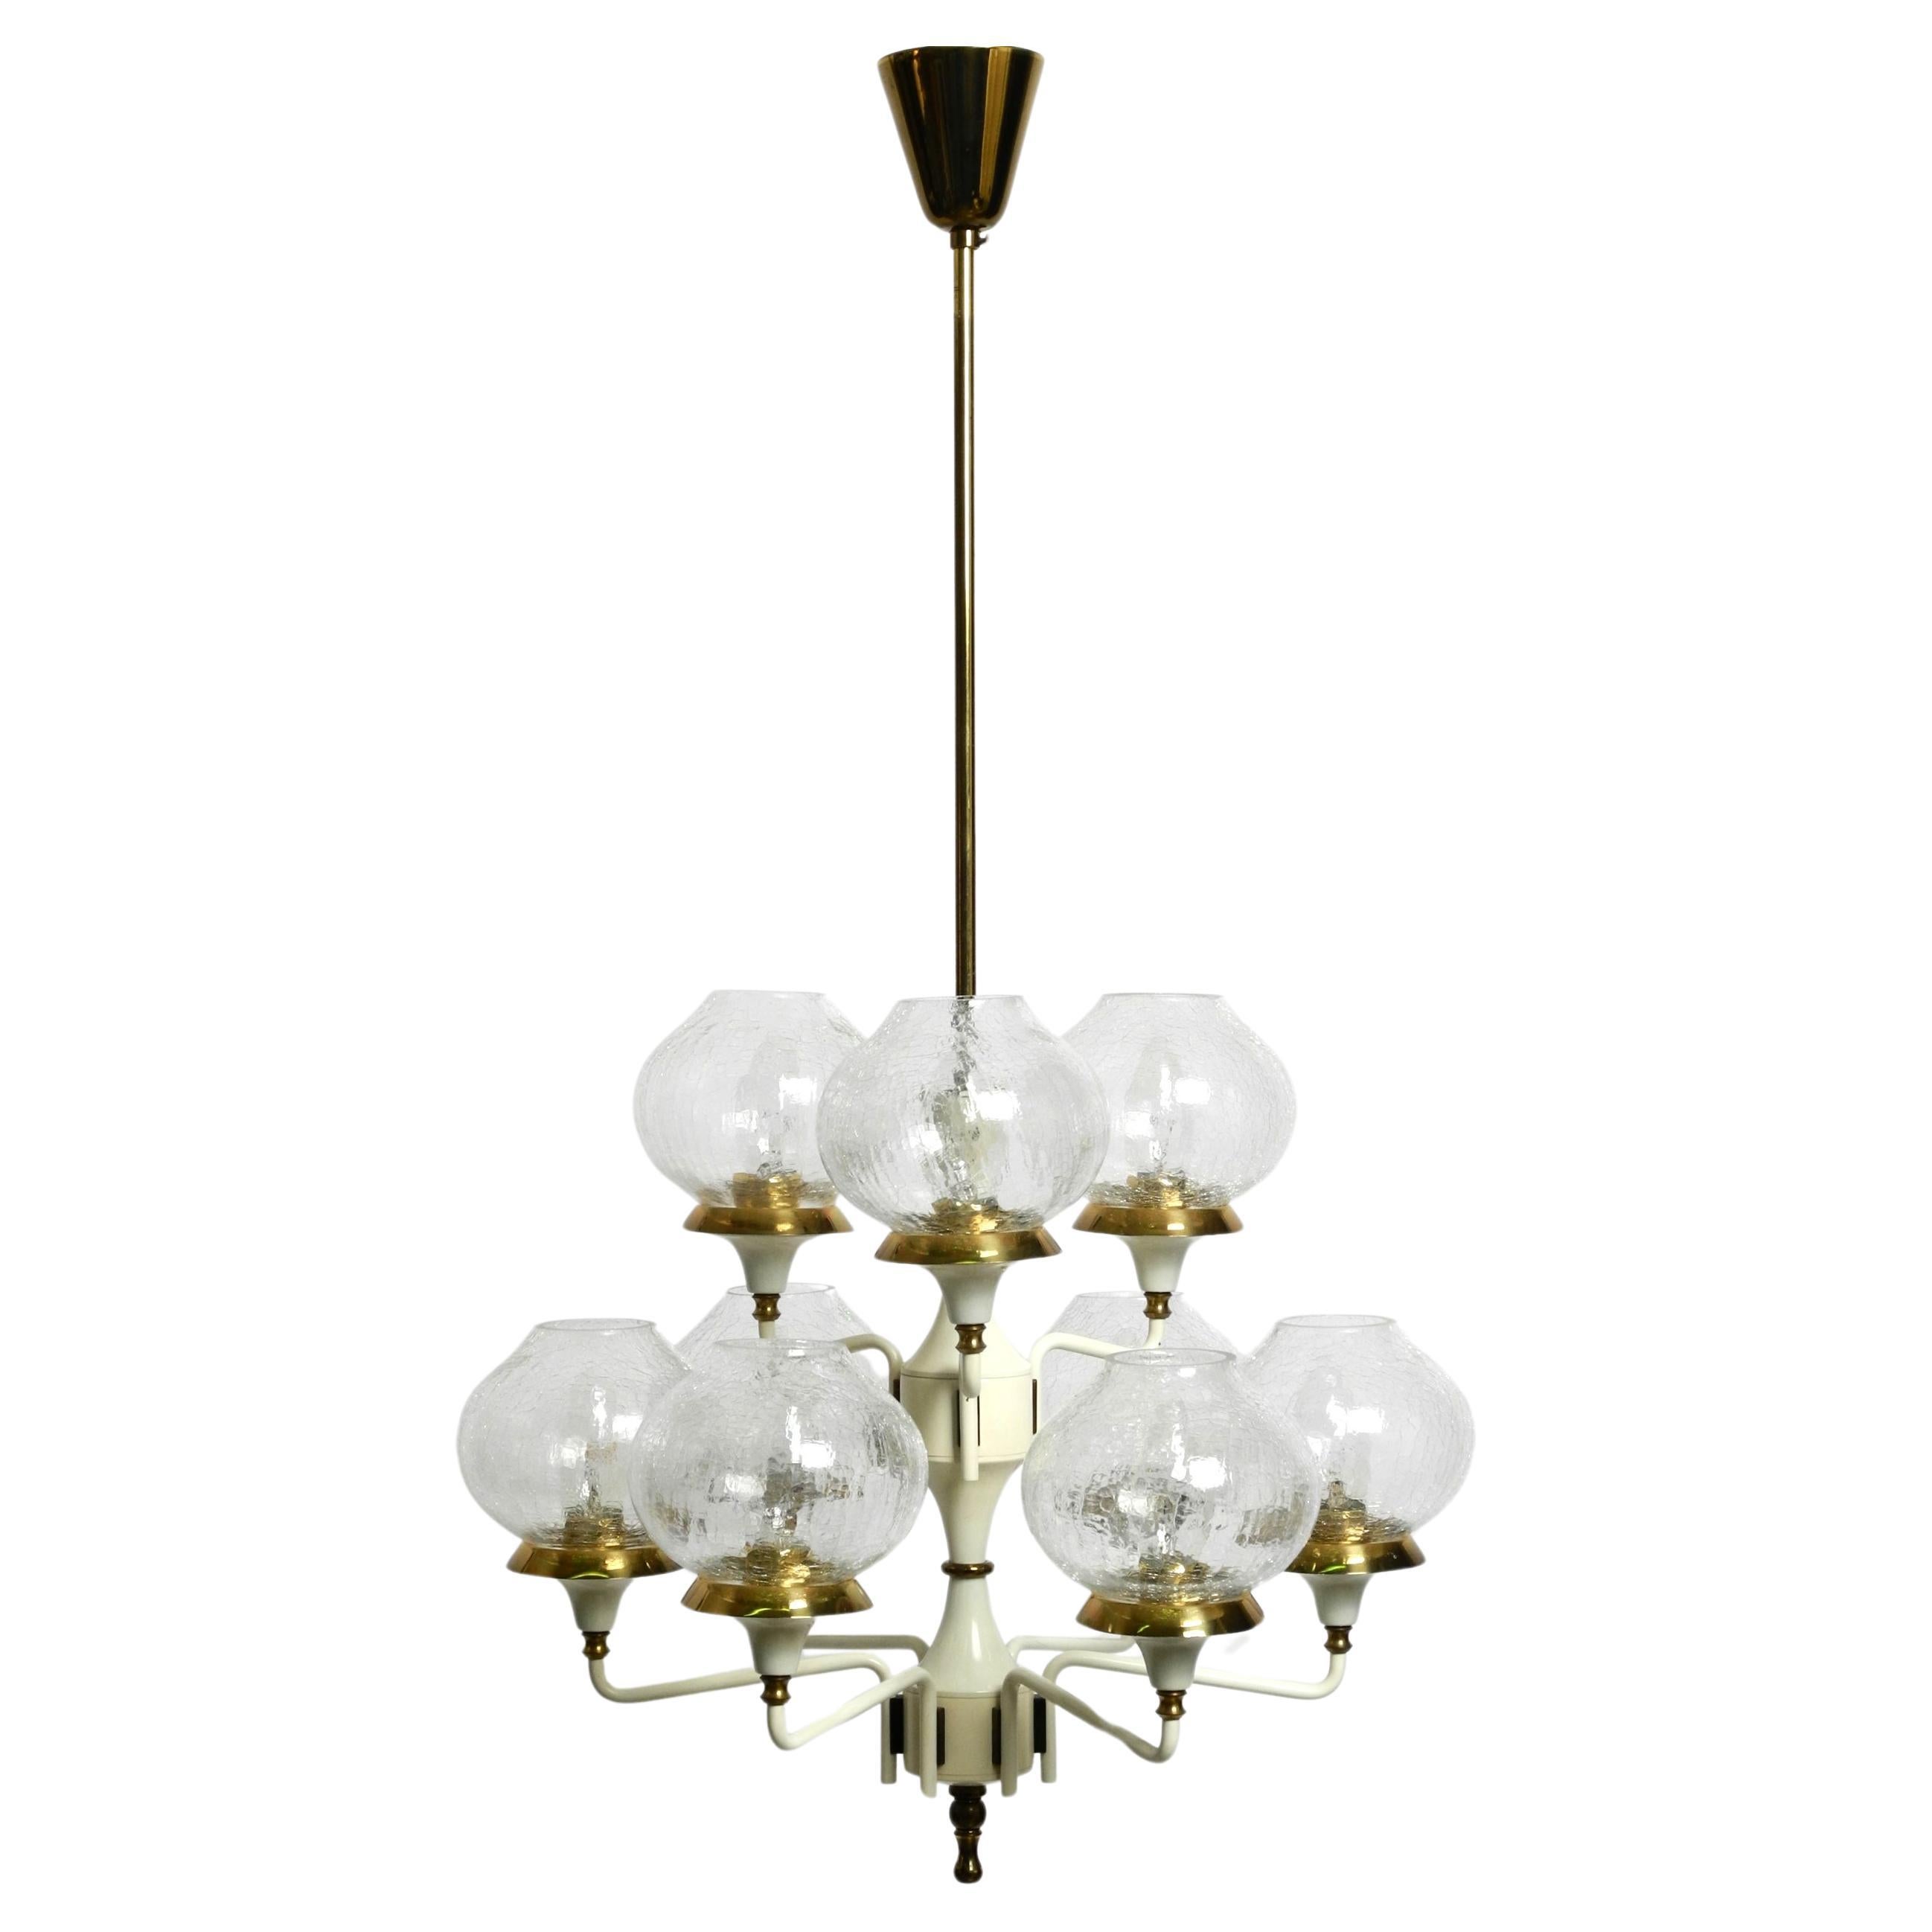 Beautiful 1960s brass glass Tulipan ceiling lamp by Hans Agne Jakobsson